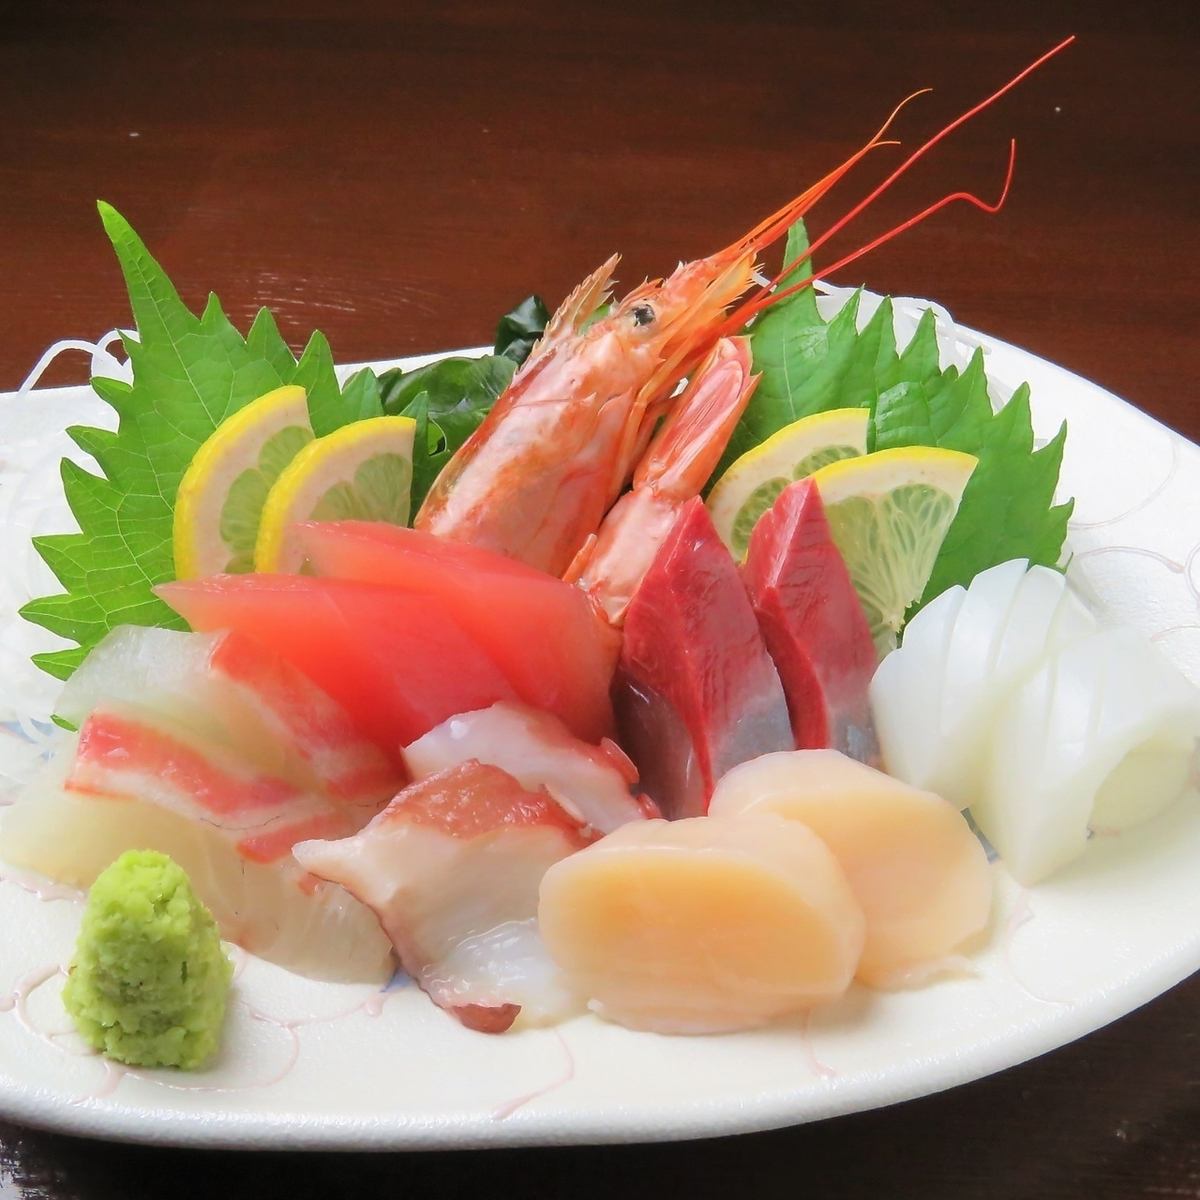 We offer seasonal fresh fish purchased directly from the market as sashimi!